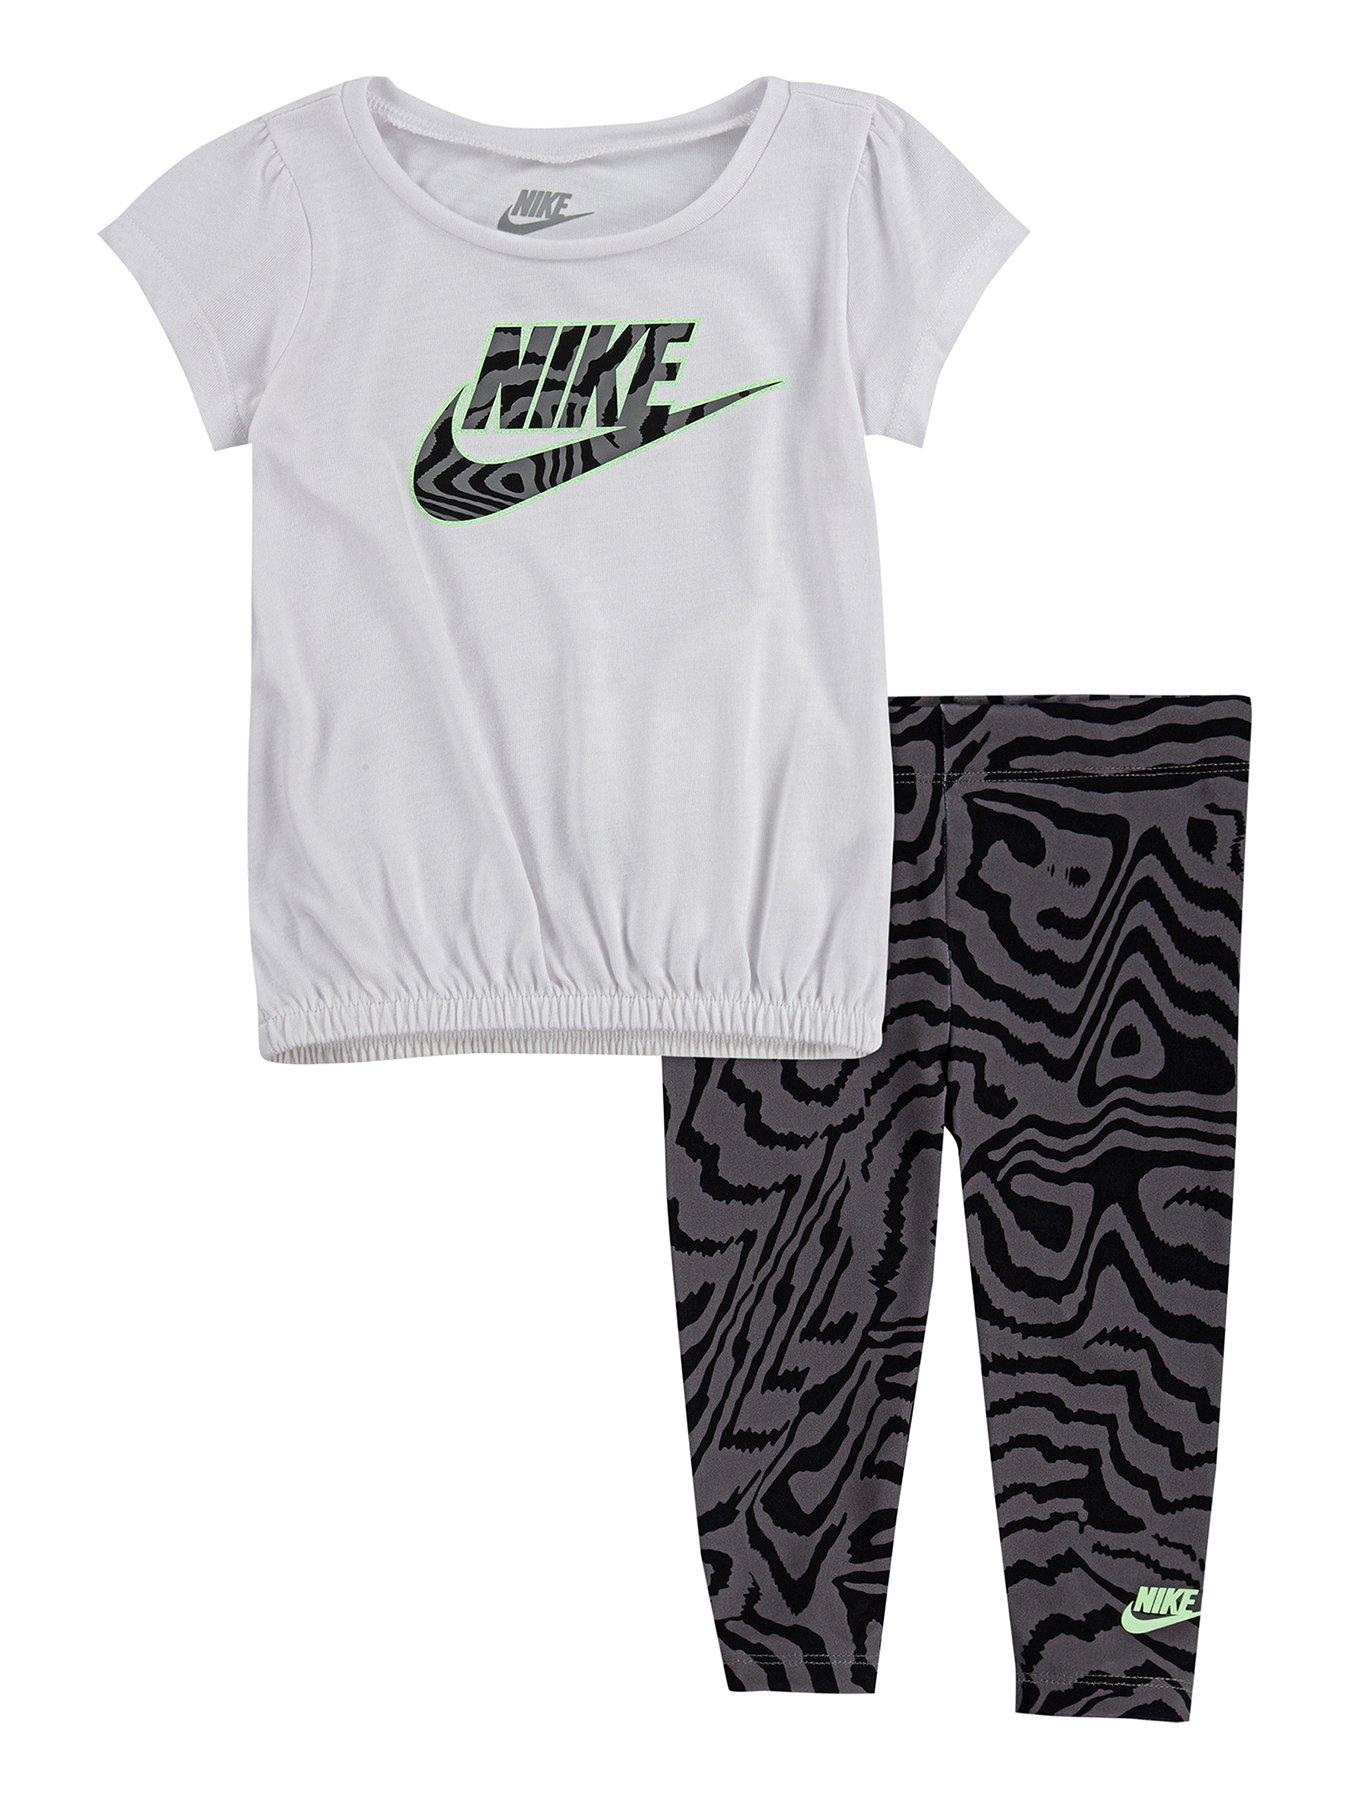 Nike Younger Girls 2 Piece Tunic Top and Leggings Set - Black | very.co.uk